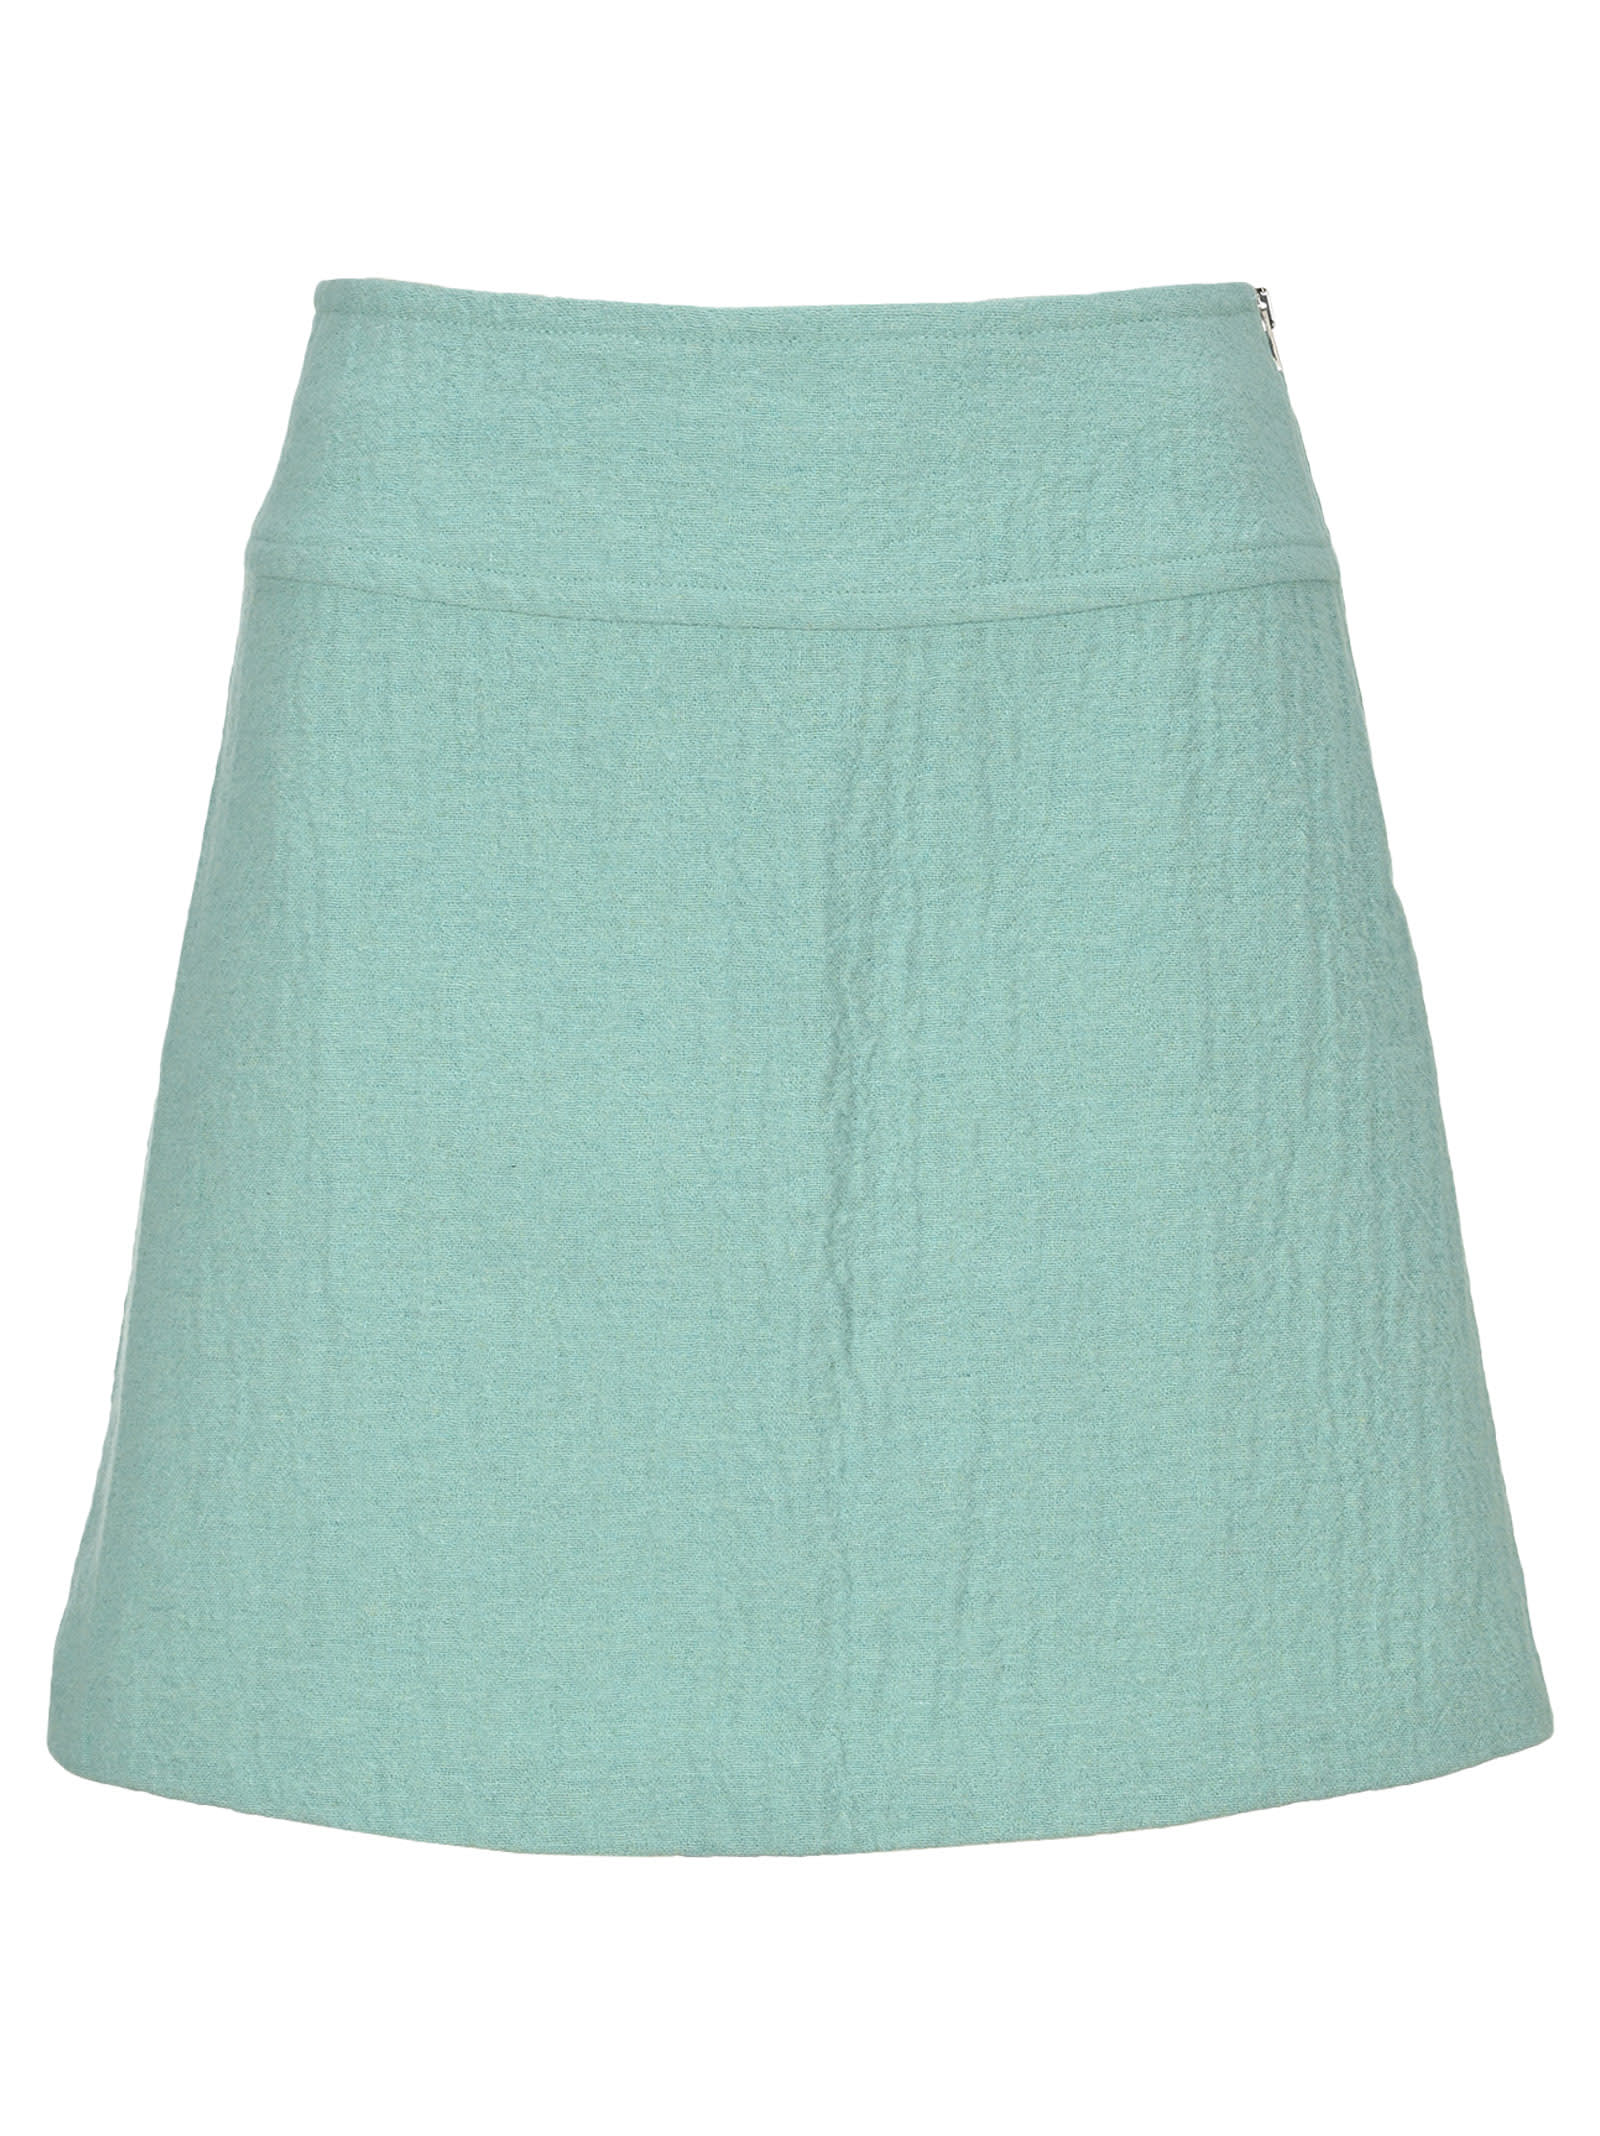 A.p.c. A.P.C. WRIGHT SKIRT